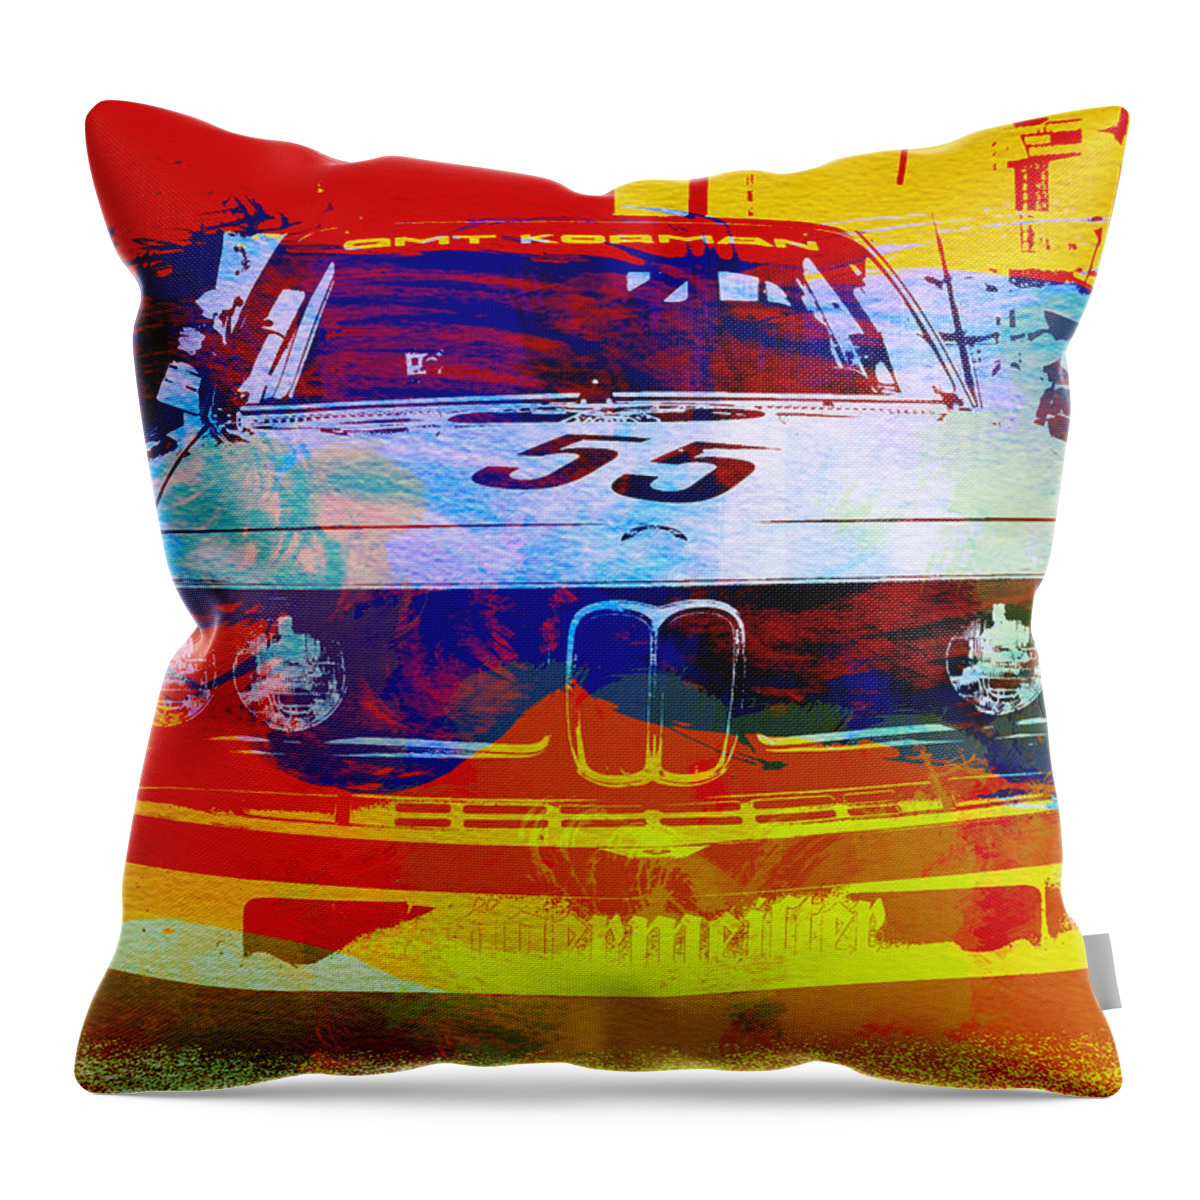  Throw Pillow featuring the photograph BMW Racing by Naxart Studio